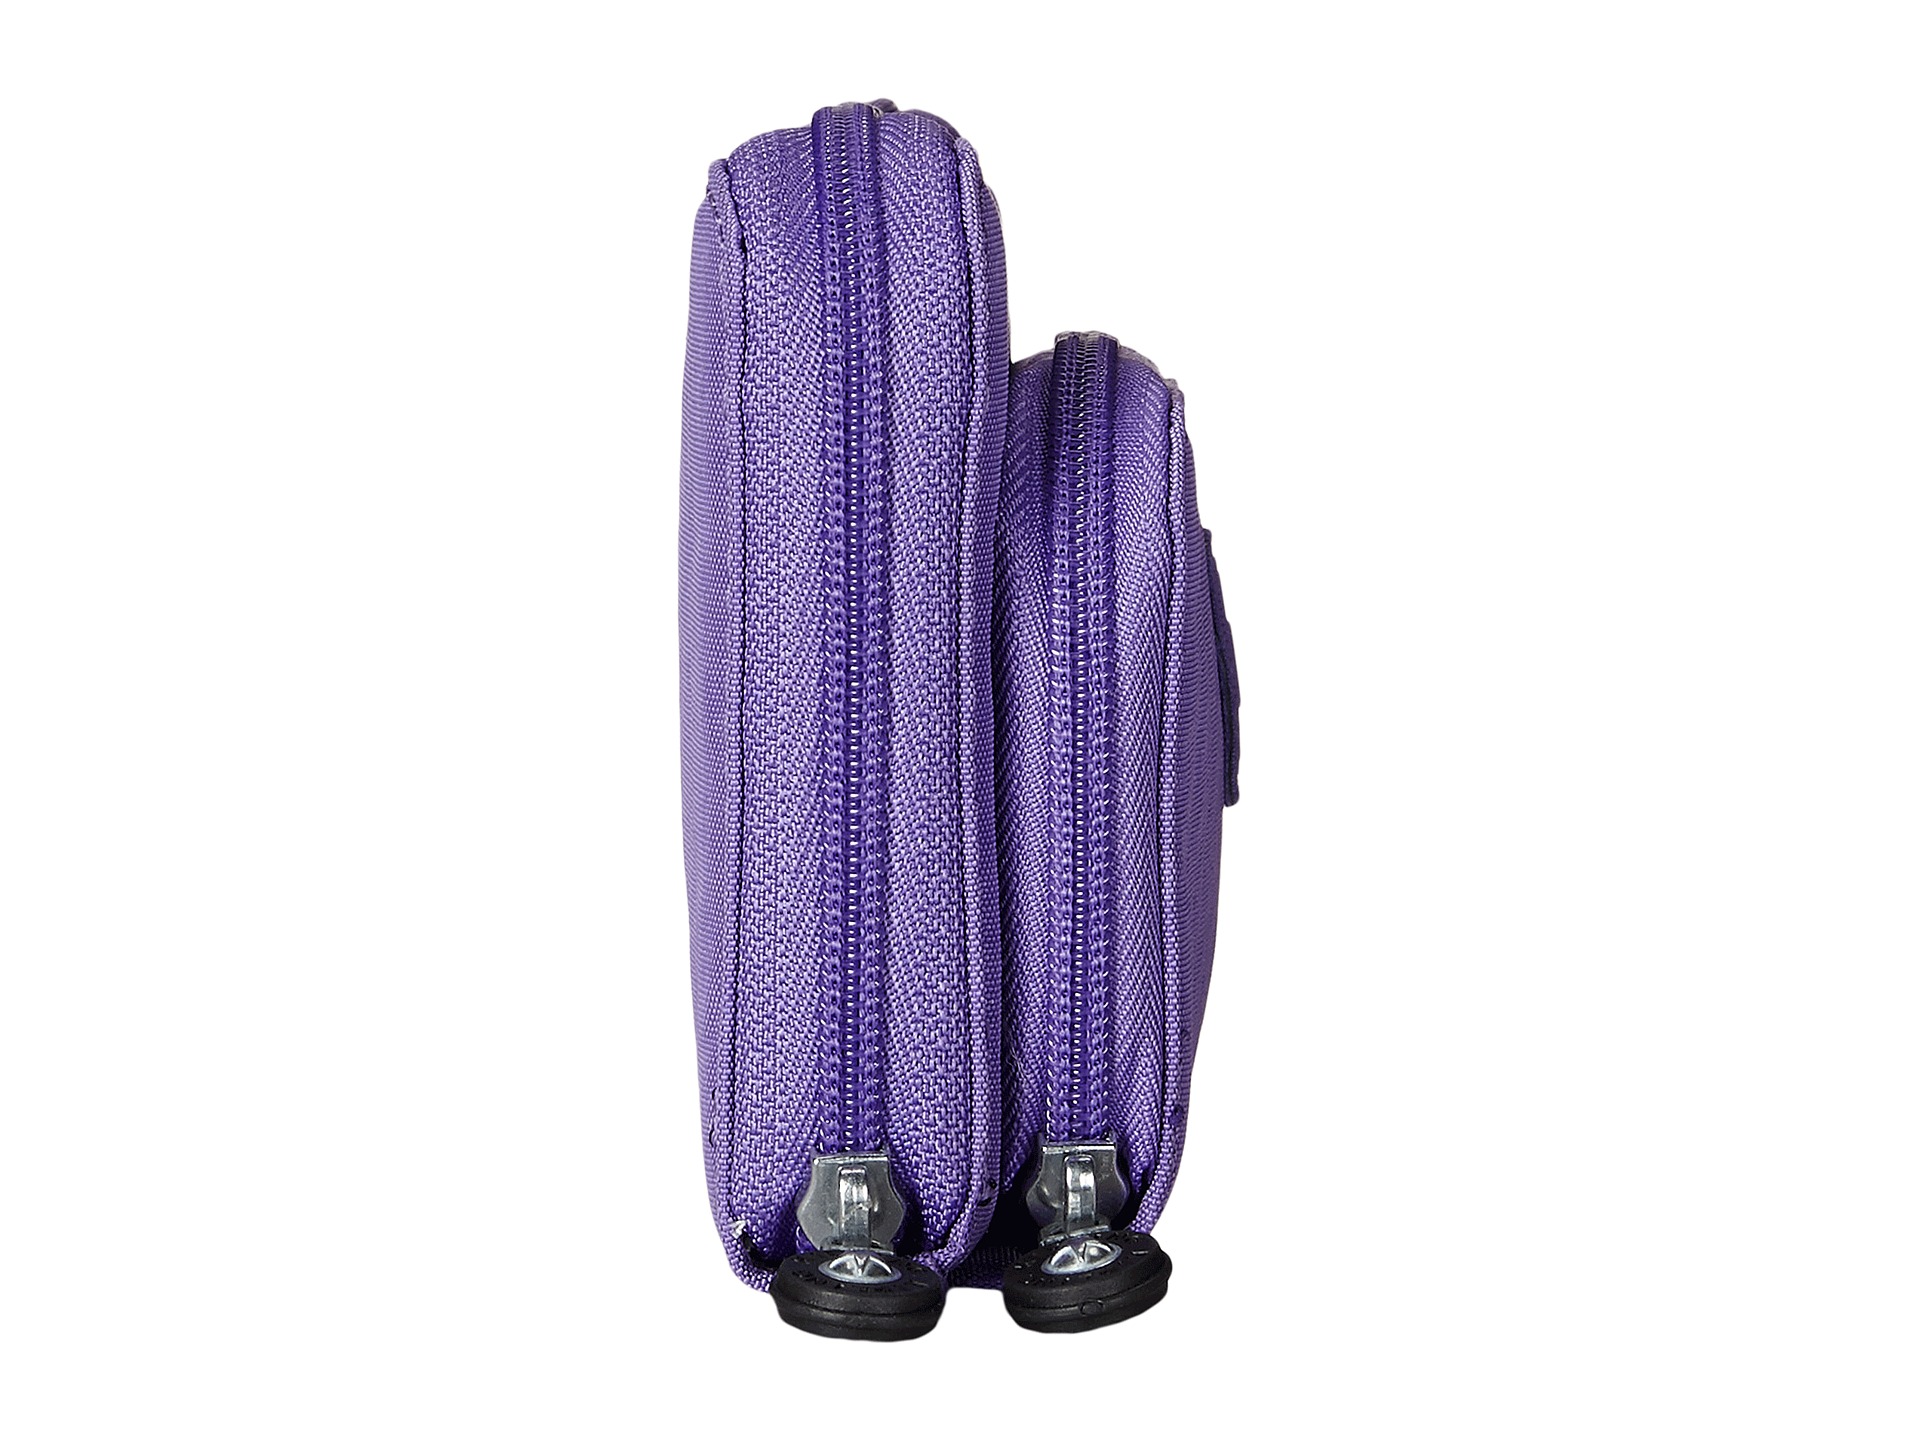 No results for kipling imogen french lavender - Search Zappos